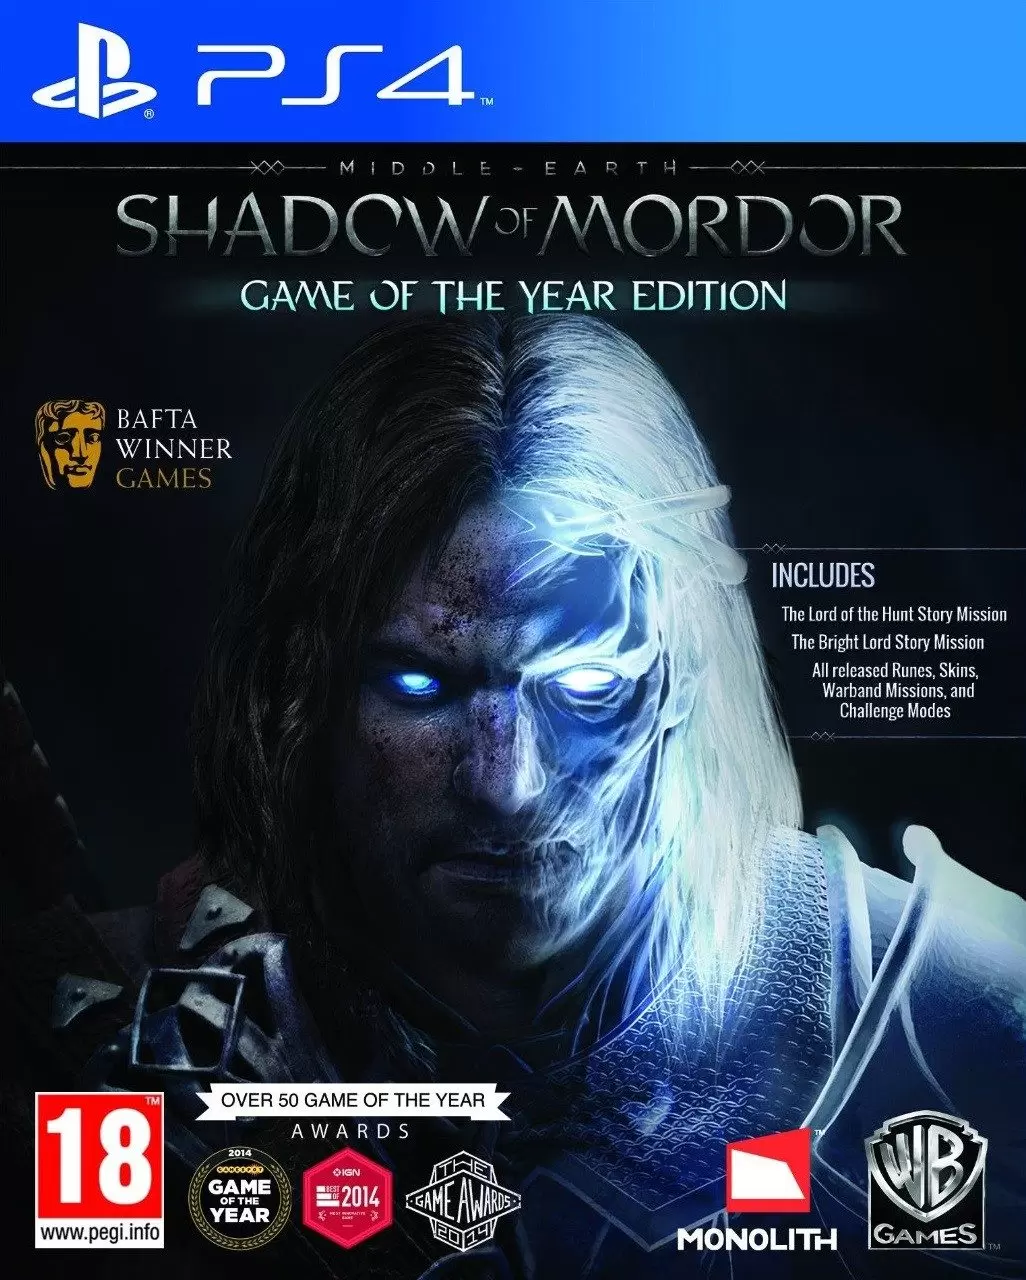 PS4 Games - Middle-Earth Shadow of Mordor: Game of the Year Edition